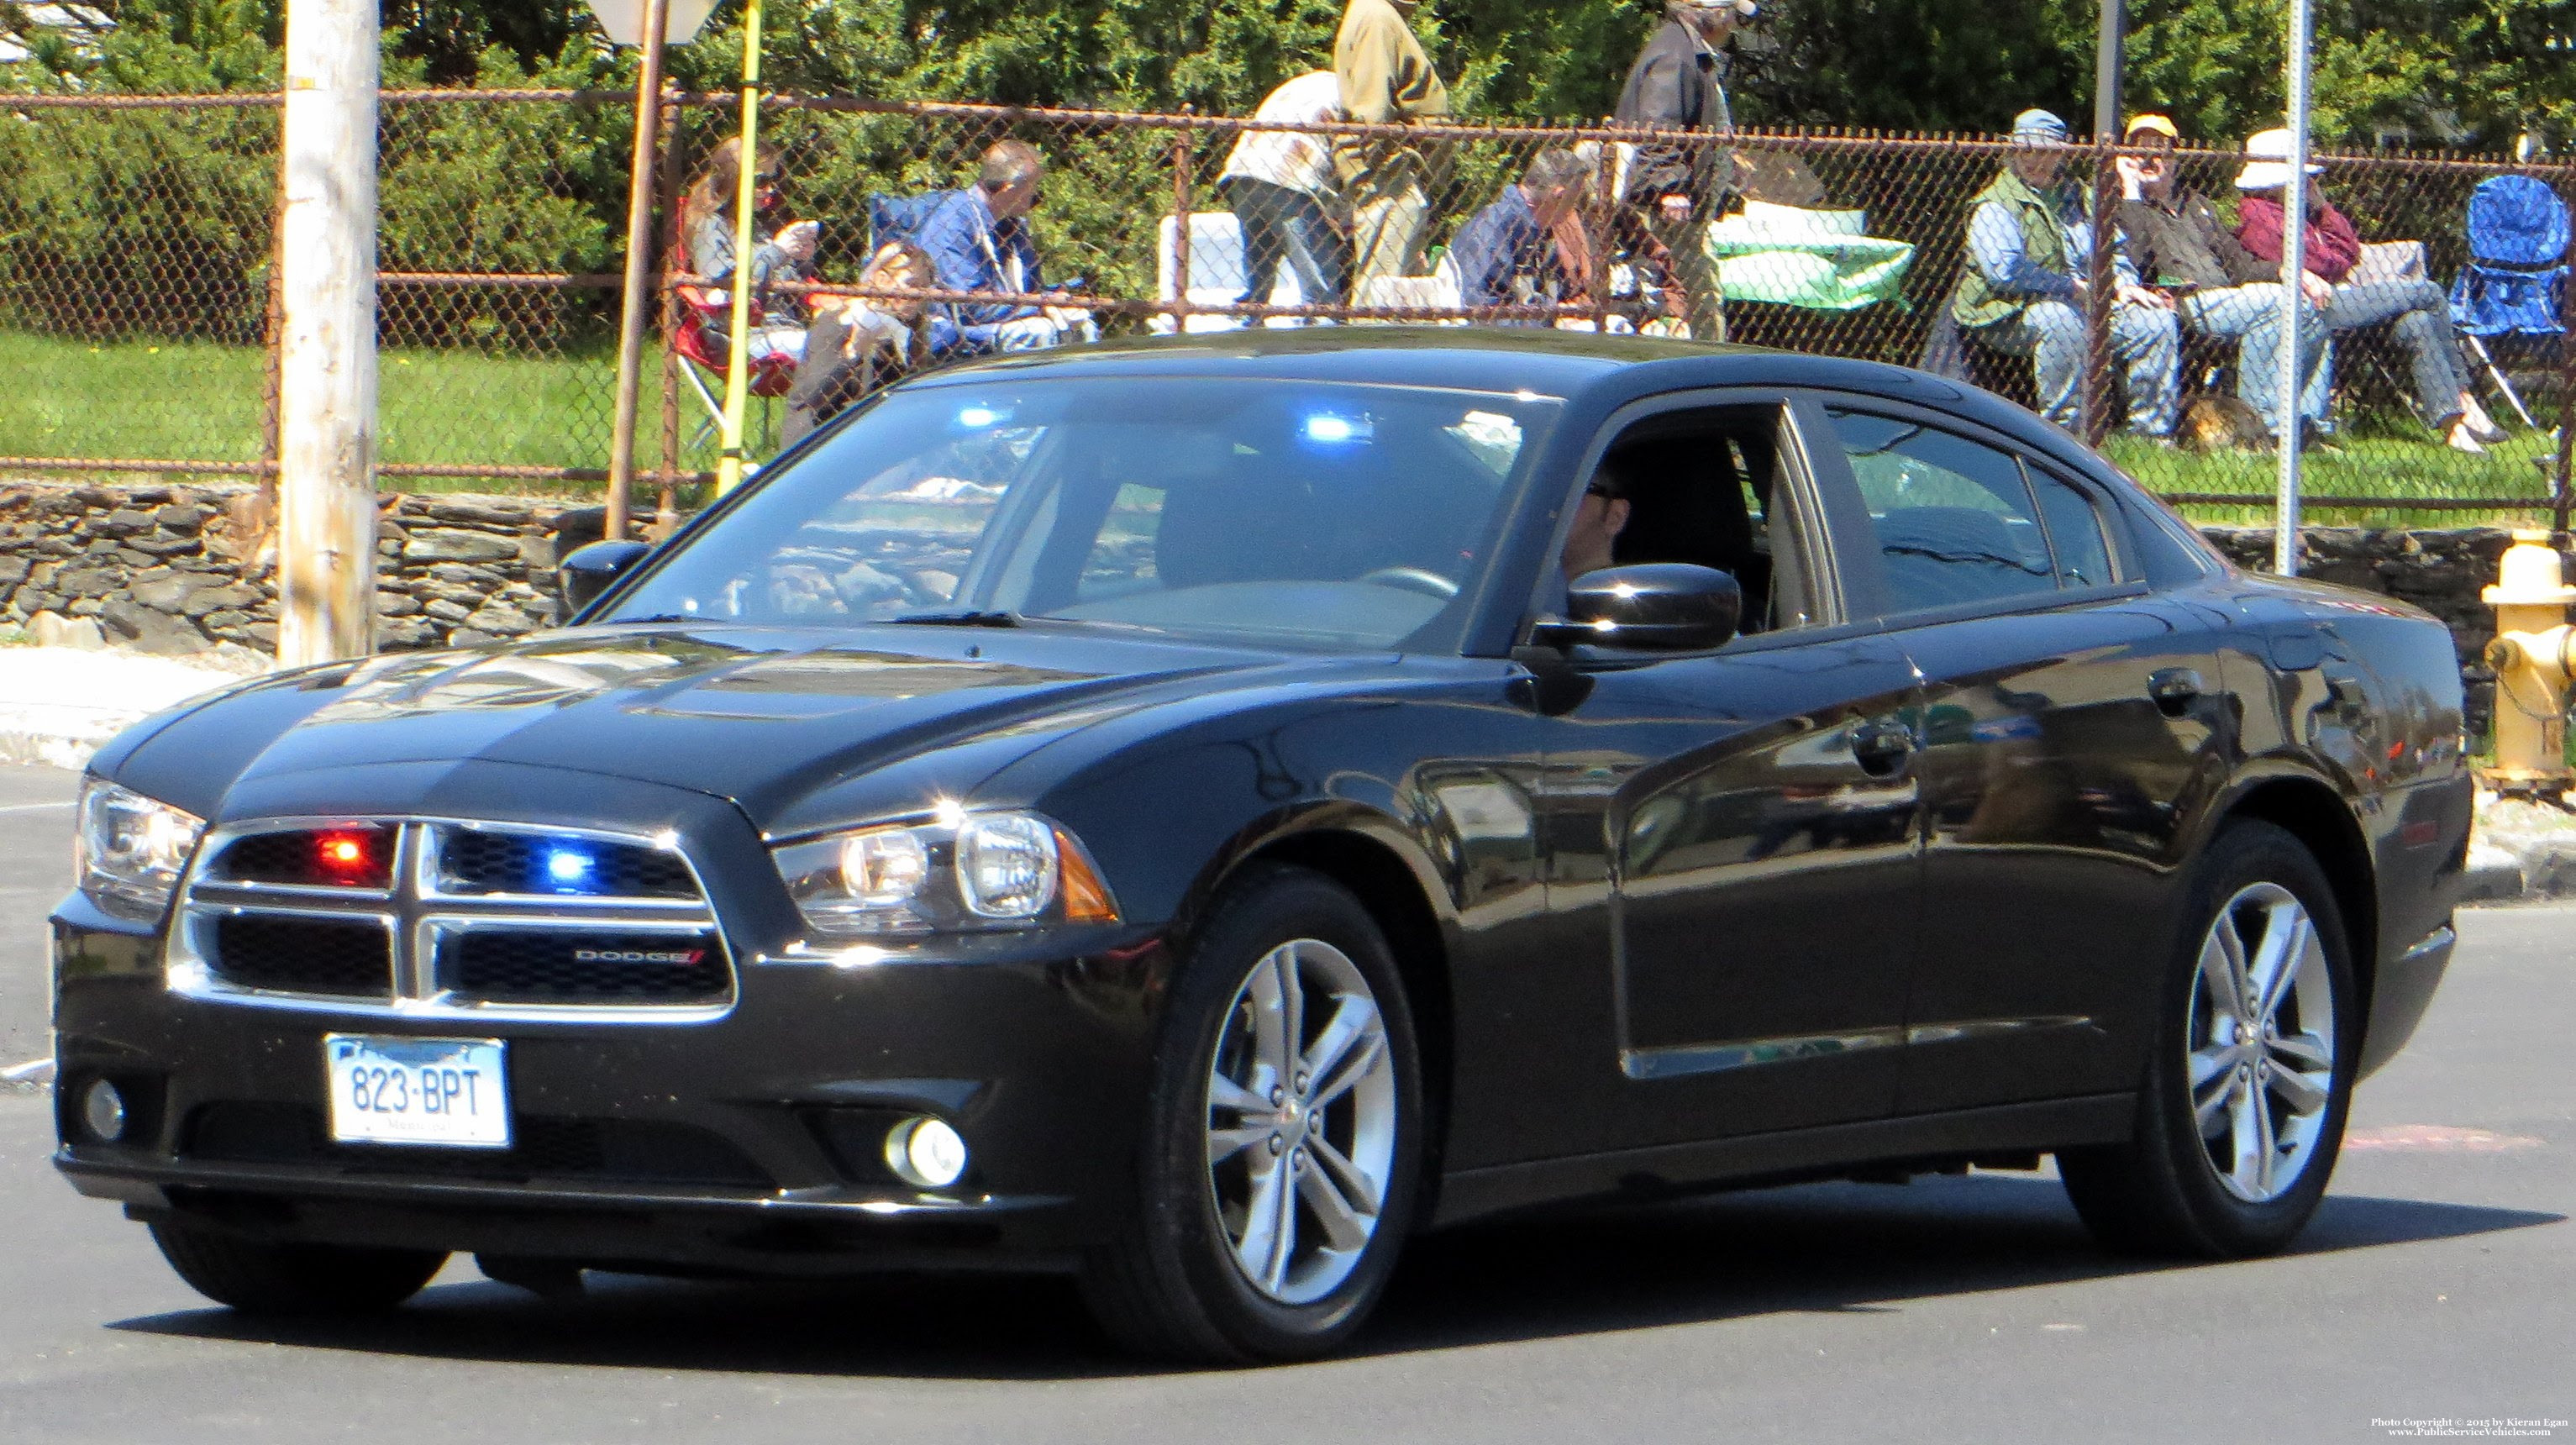 A photo  of Connecticut State Police
            Cruiser 823, a 2011-2014 Dodge Charger             taken by Kieran Egan